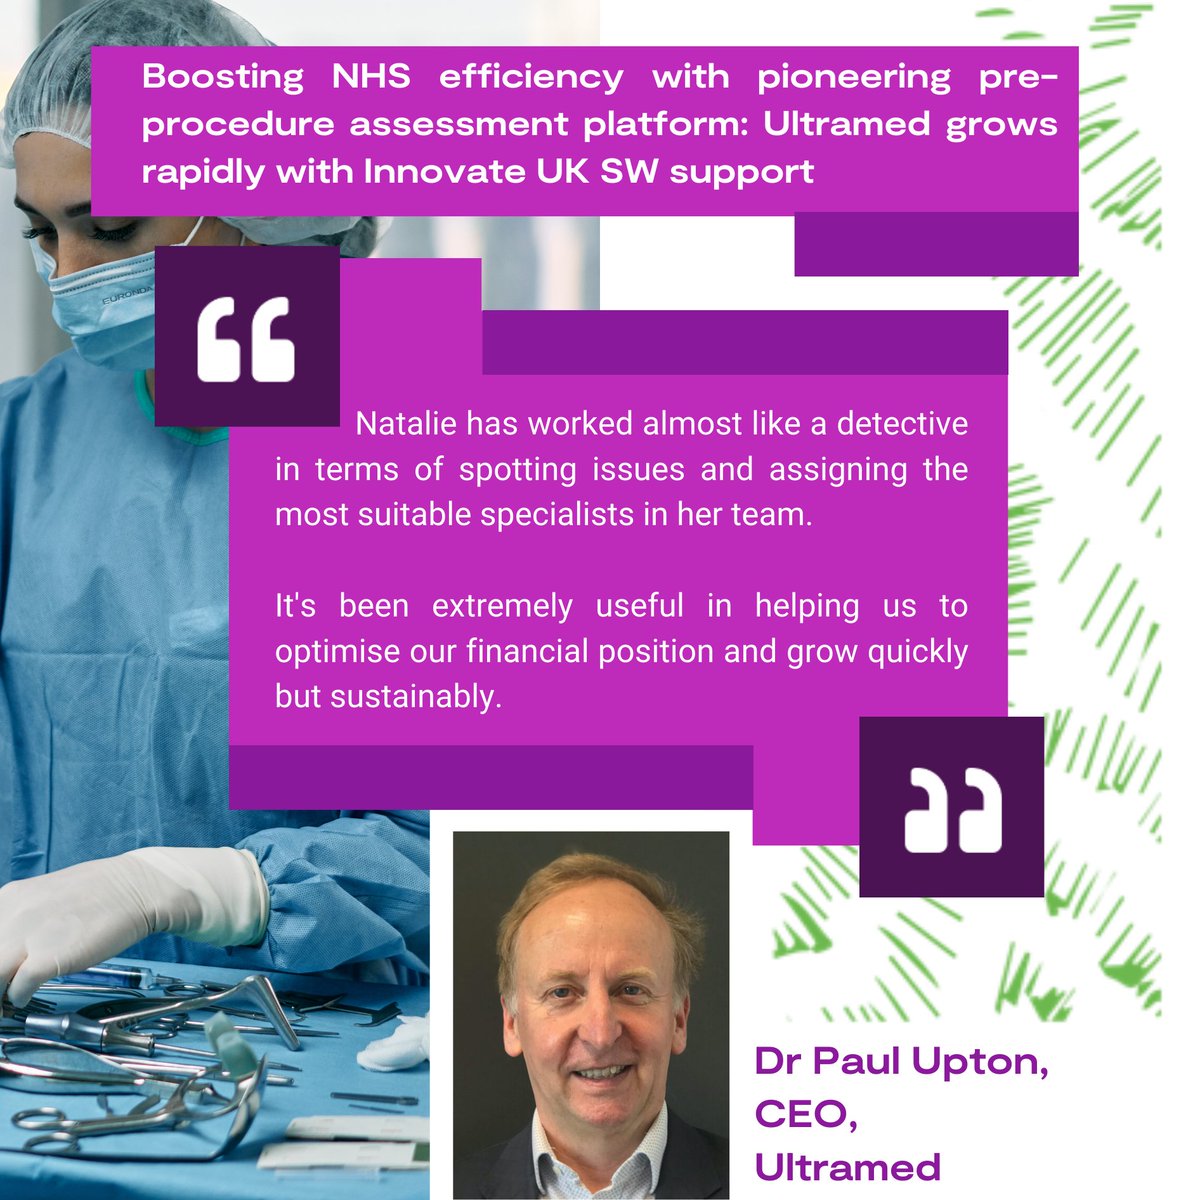 Ultramed is increasing the efficiency and cost effectiveness of NHS operations with its pioneering pre-procedure assessment platform. Find out how they reached commercialisation with game-changing growth support. bit.ly/3spY9LK #Medtech #NHSinnovation